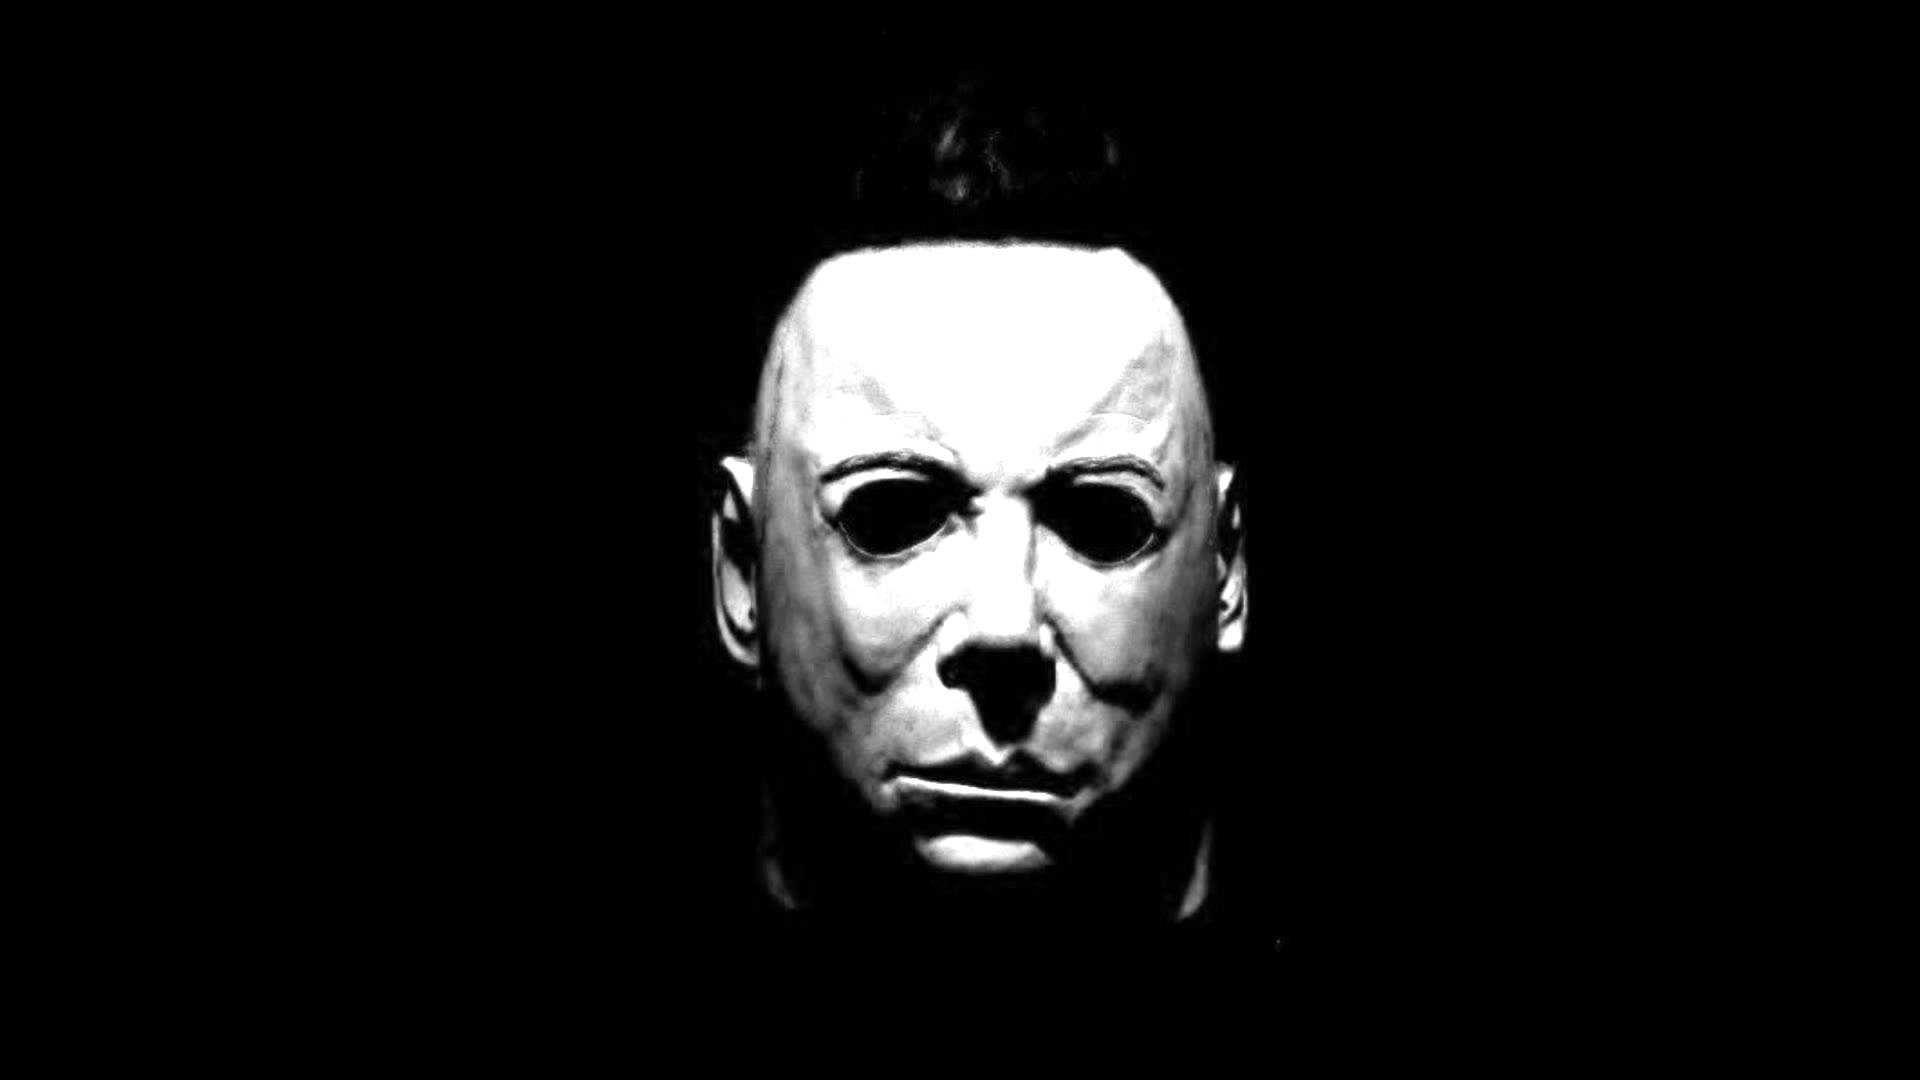 Michael Myers Live Wallpaper HD Image 4k Desktop Tapete Of Androids